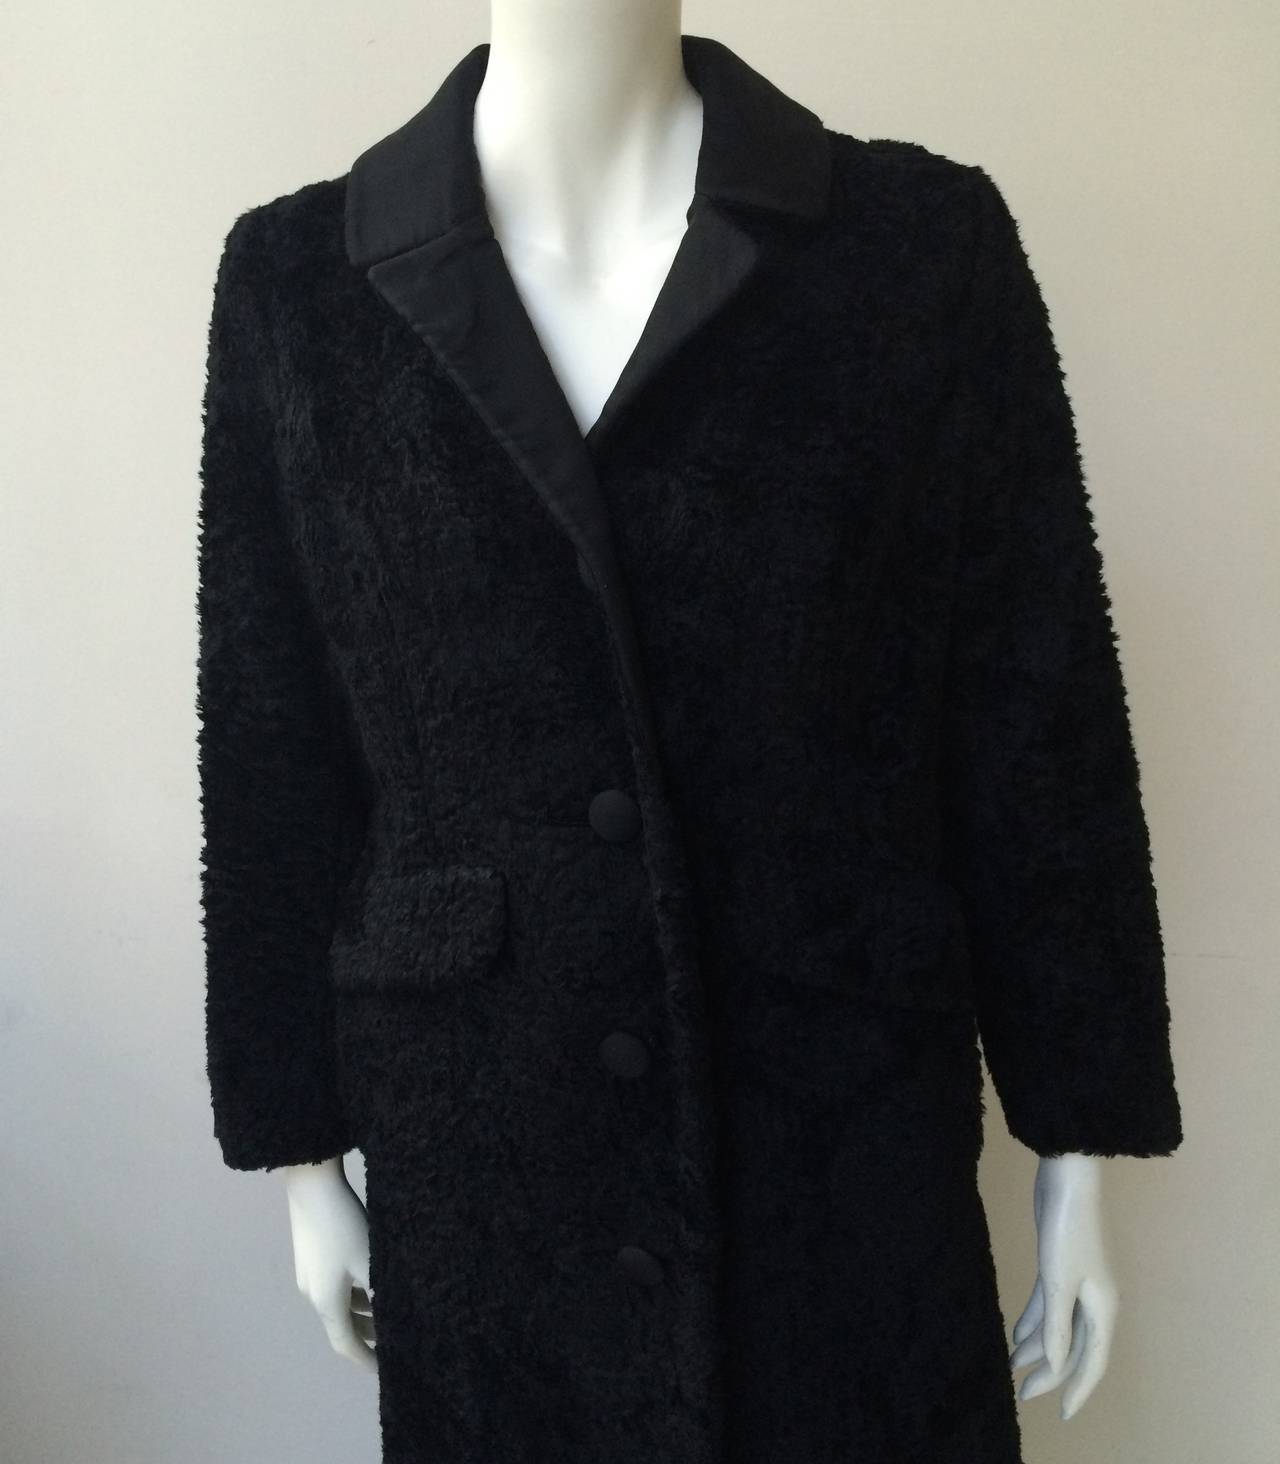 Bonwit Teller 1960s pile fabric long coat will fit a size 8 / 10 but please see measurements.  Fabric by Sidney Blumenthal & Co fabric woven in the USA. There are four fabric covered buttons and two front pockets. Here is the definition of pile